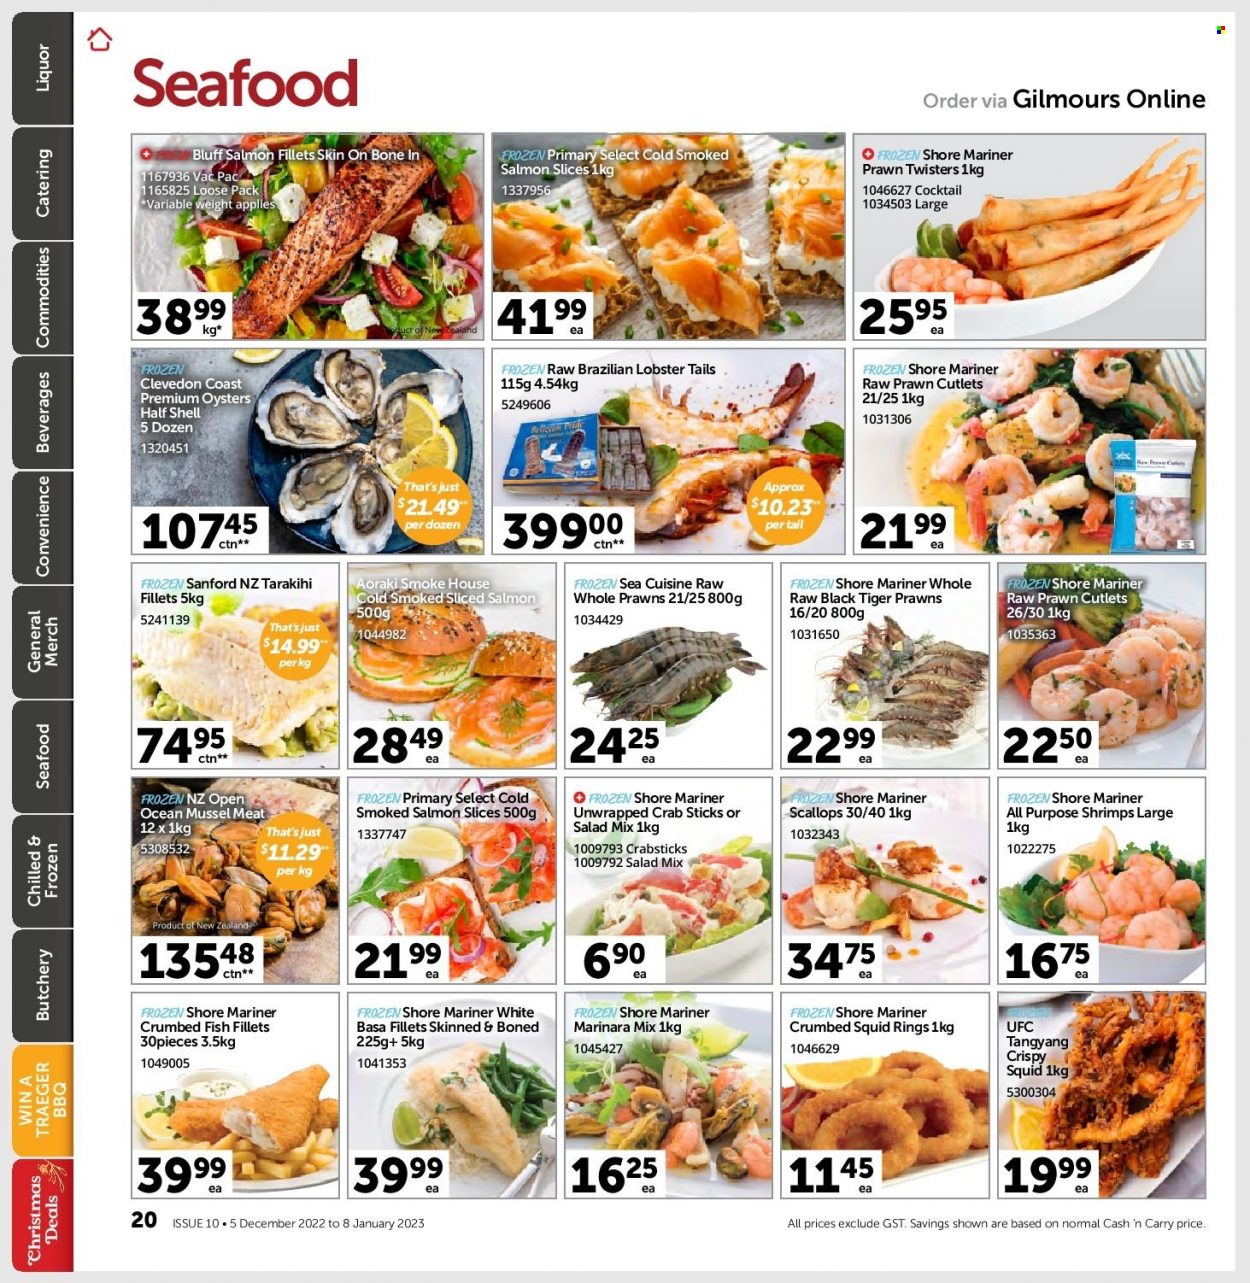 thumbnail - Gilmours mailer - 05.12.2022 - 08.01.2023 - Sales products - fish fillets, lobster, mussels, salmon, salmon fillet, scallops, shrimps, smoked salmon, squid, oysters, seafood, prawns, crab, fish, lobster tail, crumbed fish, Shore Mariner, squid rings, tarakihi, liquor. Page 19.